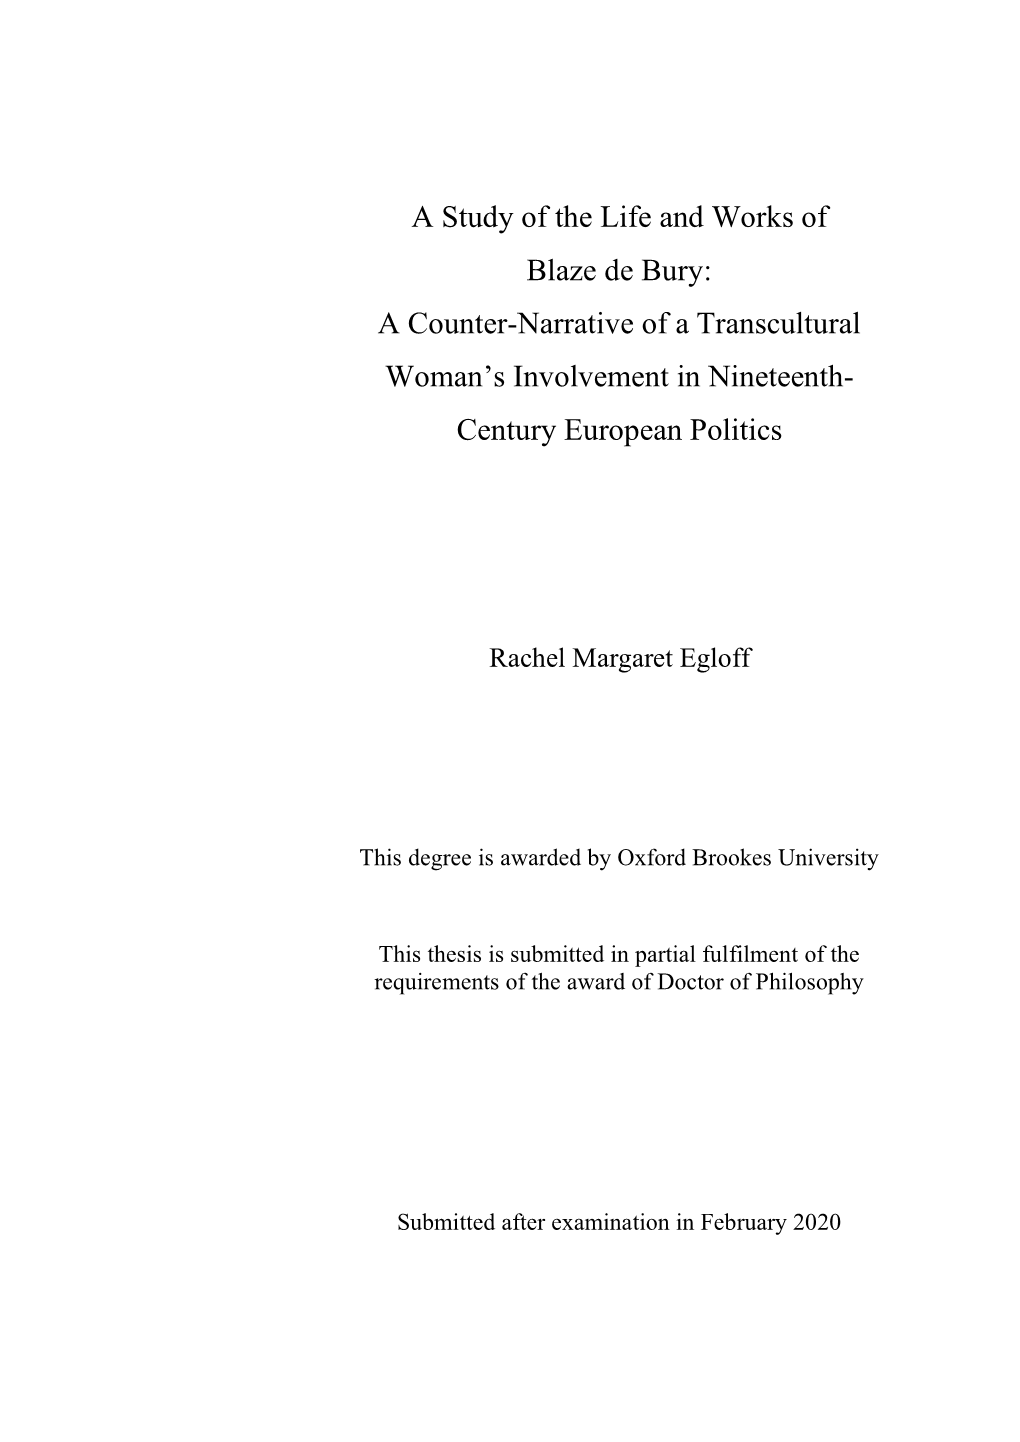 A Study of the Life and Works of Blaze De Bury: a Counter-Narrative of a Transcultural Woman’S Involvement in Nineteenth- Century European Politics